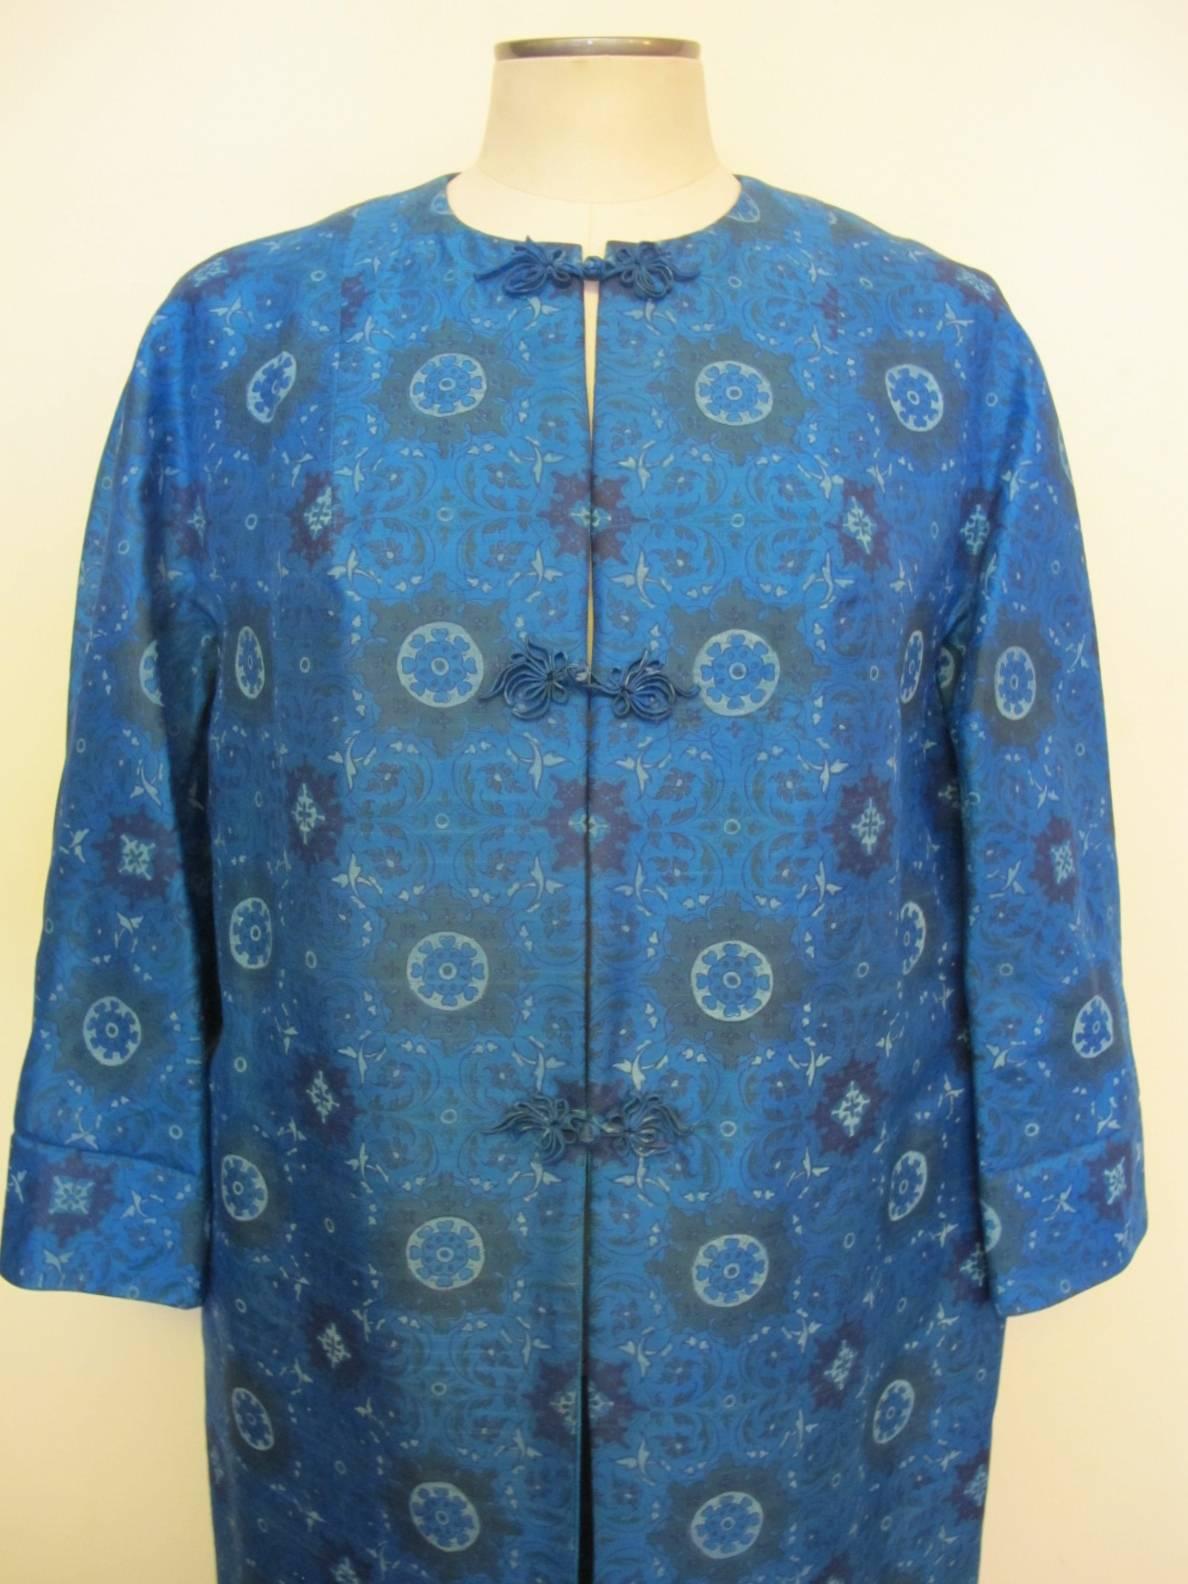 The patterned coat has three frogs. The solid Turquoise Blue Coat has no frogs. There are four pockets - 2 pockets for each design. The coat fits the body perfectly and it has a continuous sleeve. A lovely knotted belt can be worn on the waist. Fits